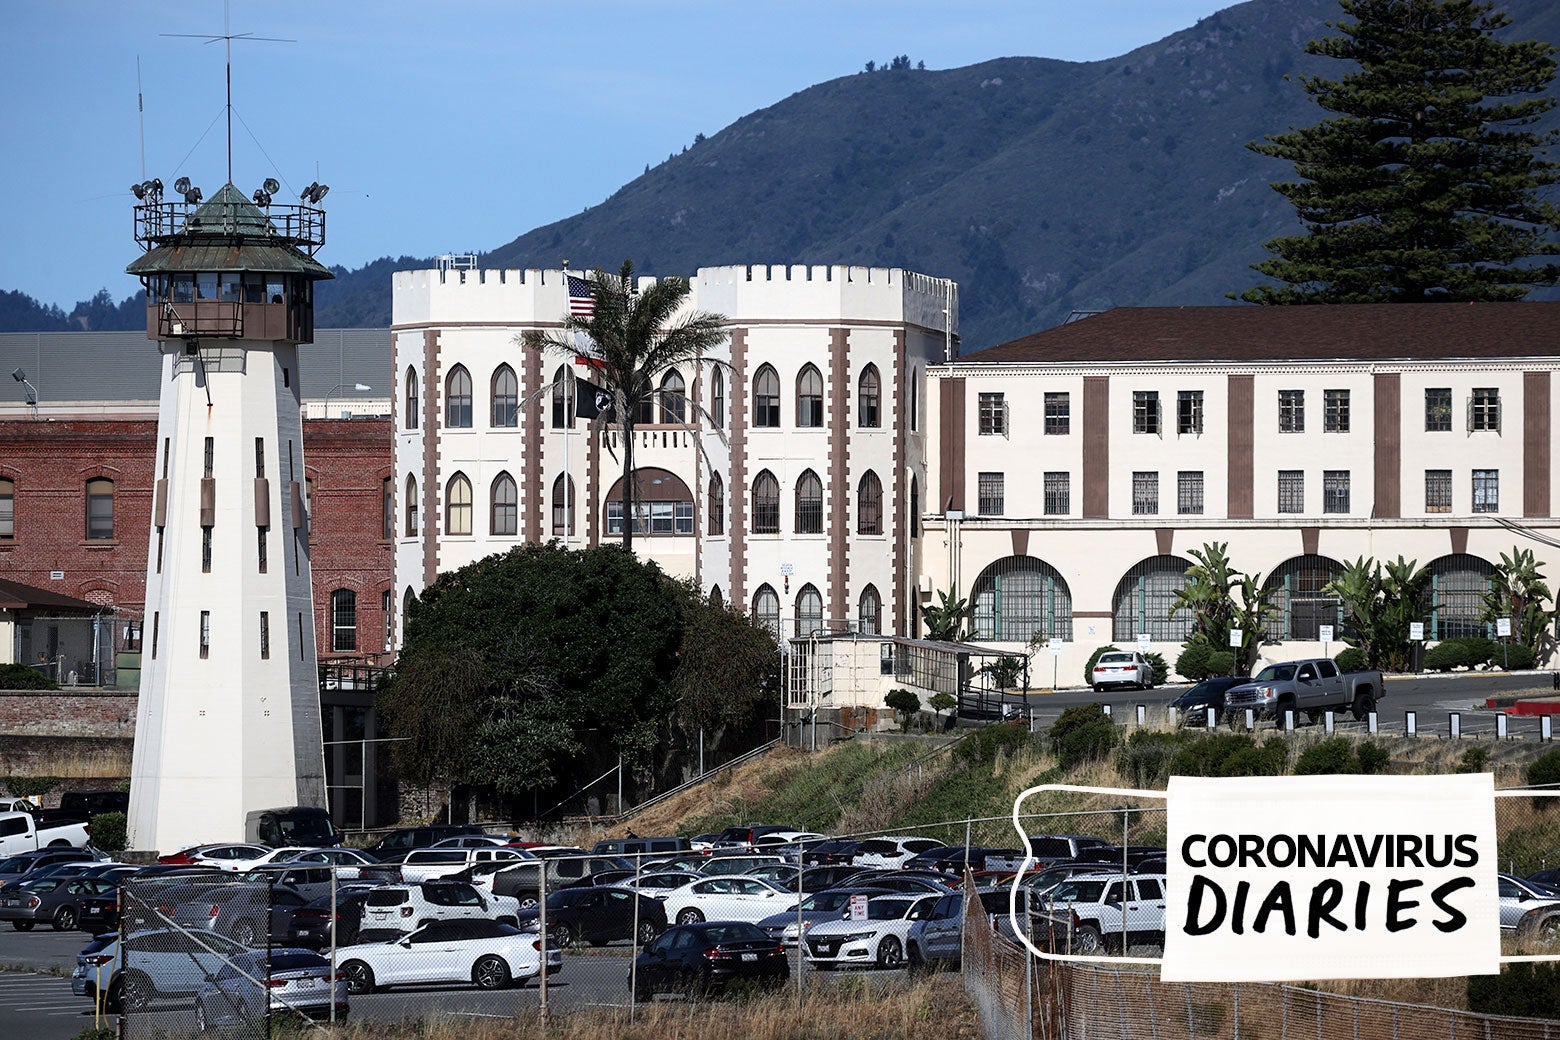 A view of San Quentin State Prison